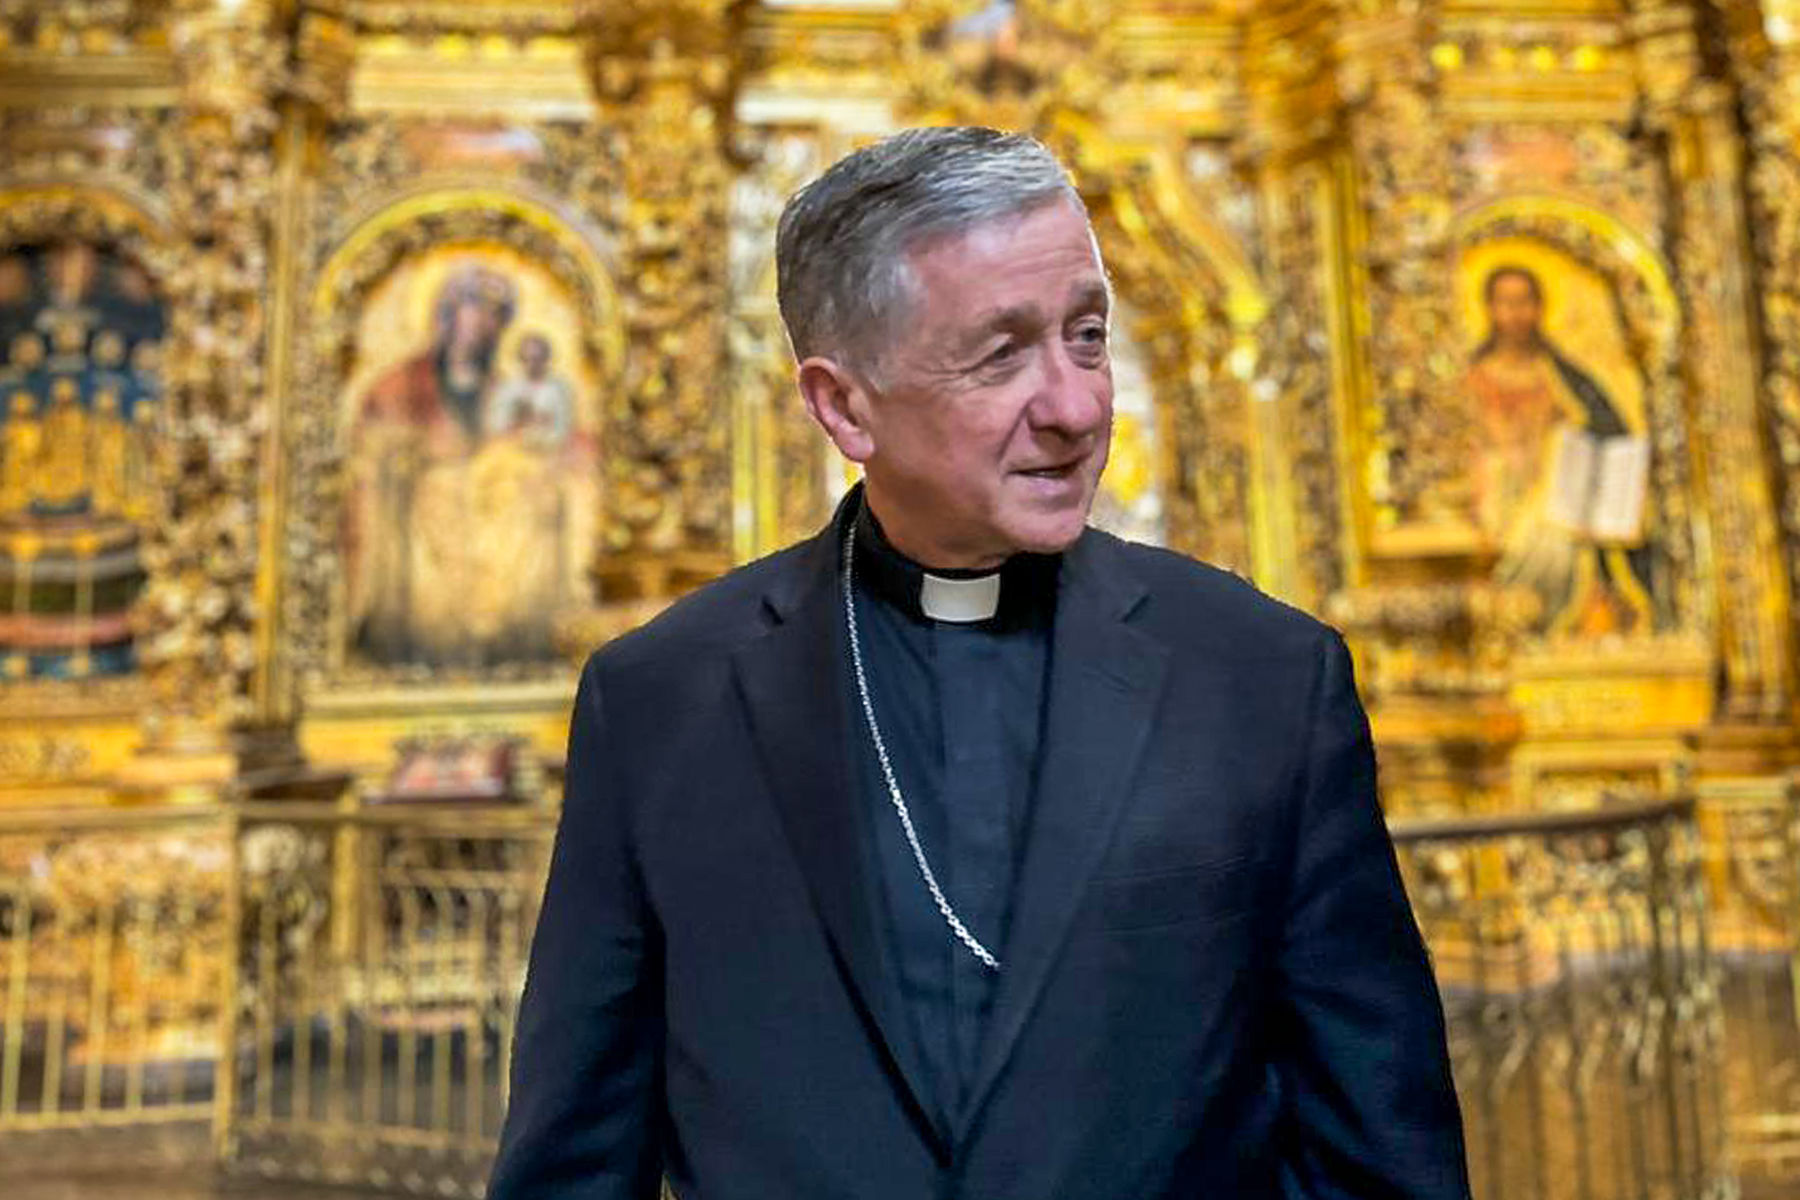 “I have witnessed how strong Ukraine is as a nation” — Archbishop of Chicago Cardinal Blase Cupich visits Kyiv